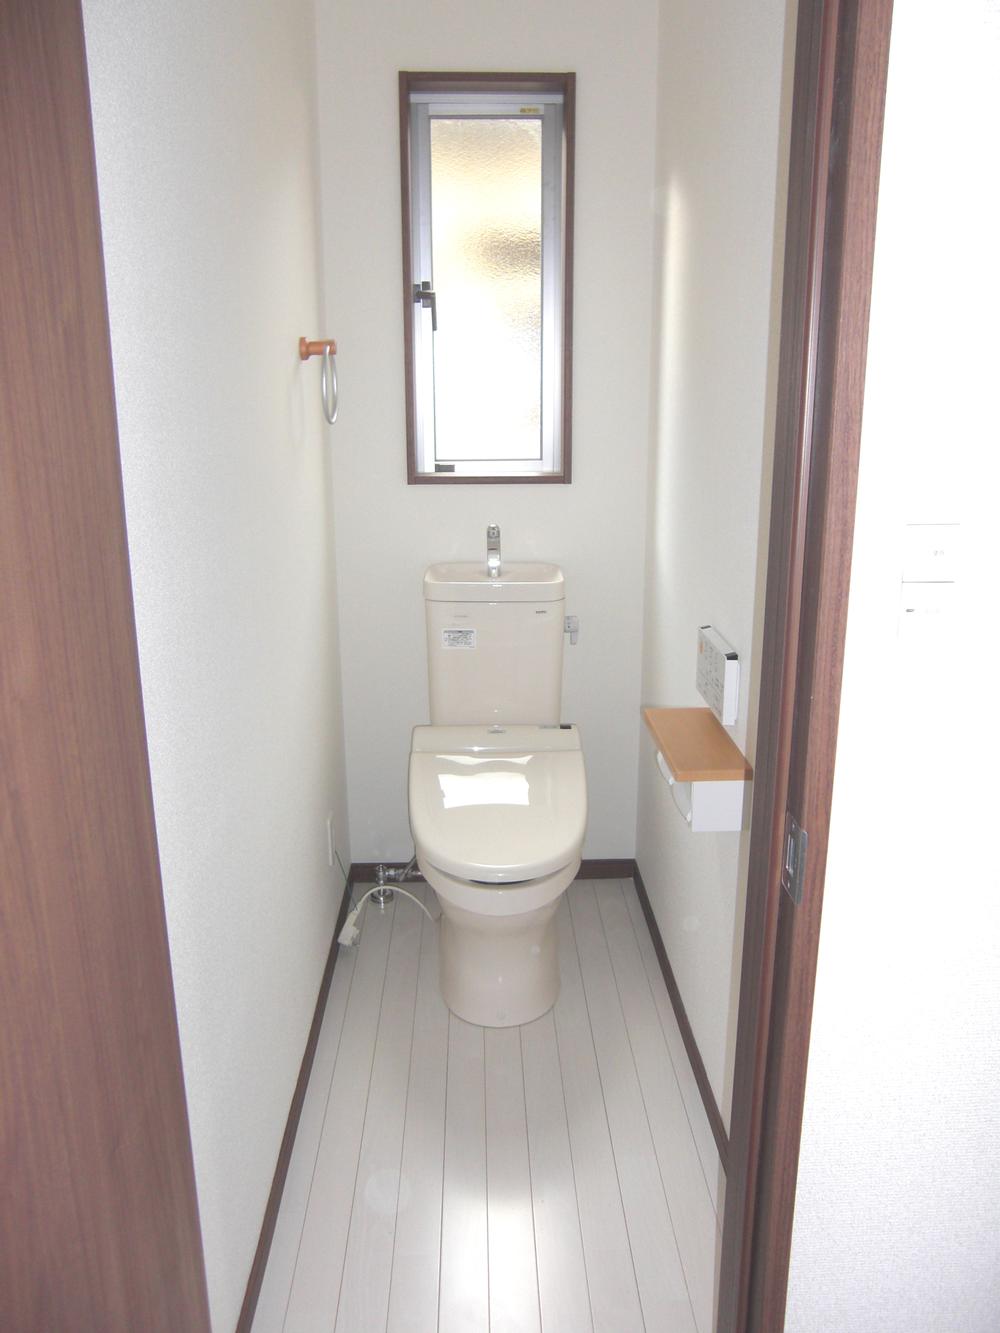 Toilet. Both 1.2-floor bidet correspondence. Using an air wash cloth on the first floor toilet Cross which has the effect of taking the smell